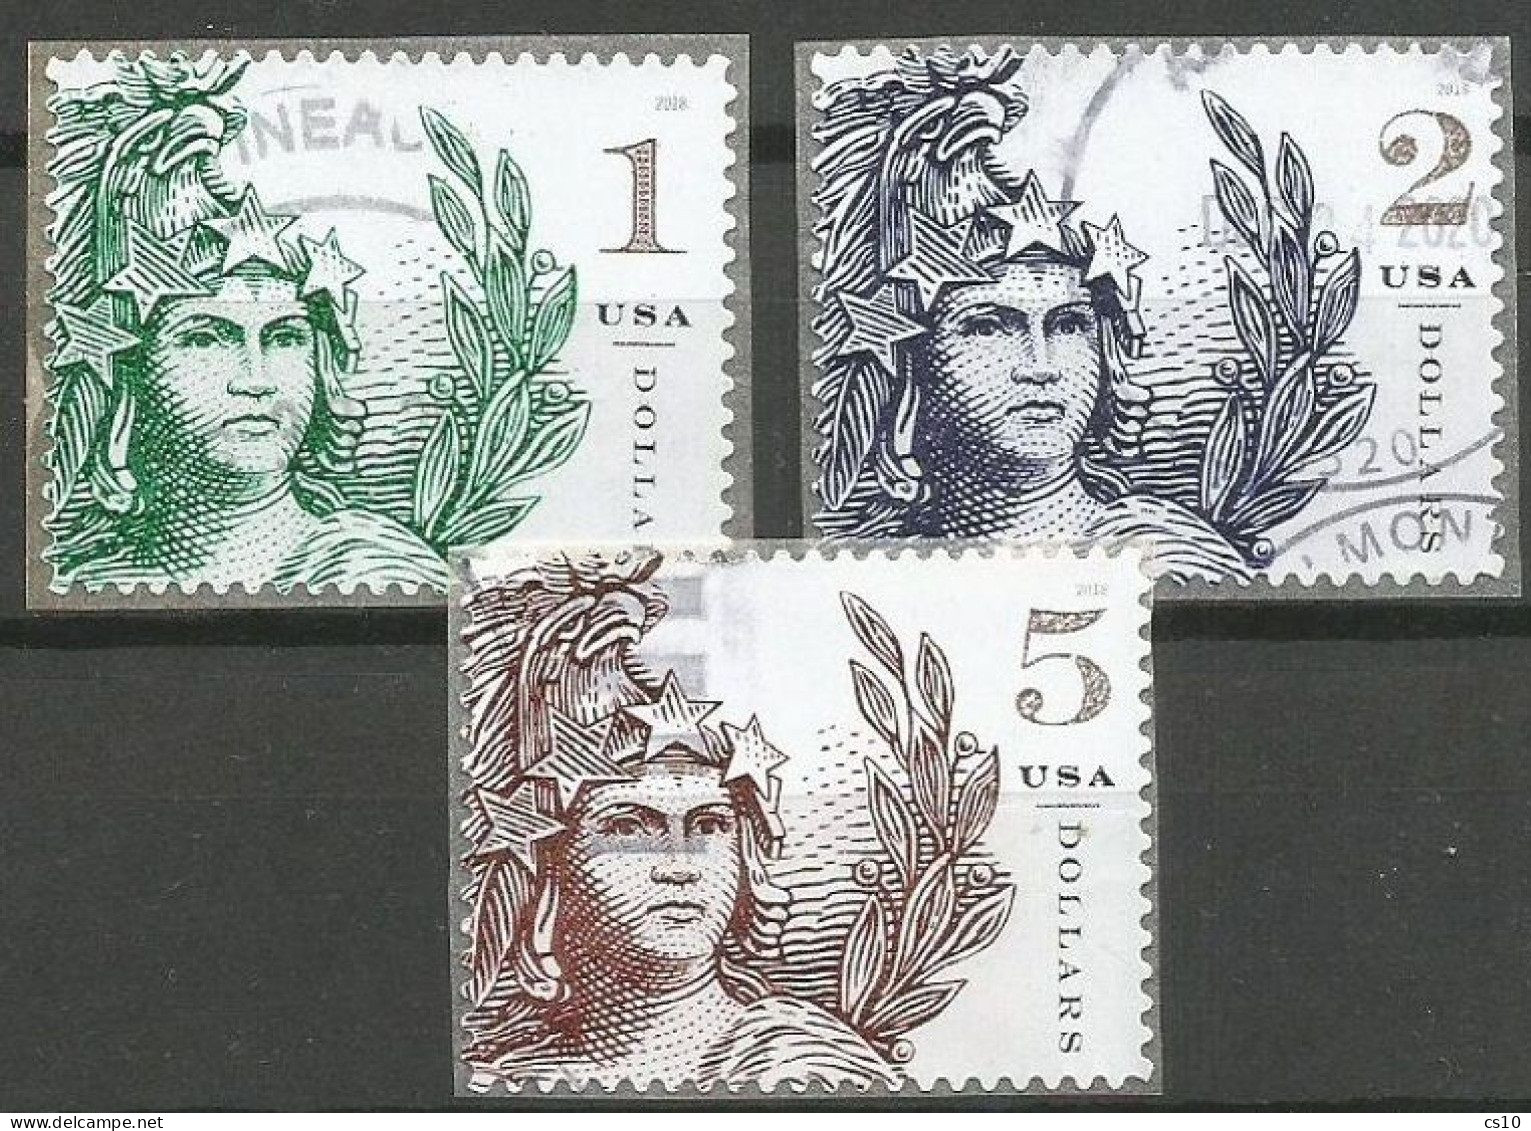 USA 2018 Statue Of Liberty - Freedom High Values $ 1-2-5 SC.# 5295/97 - Cpl 3v Set In VFU Condition - Verzamelingen